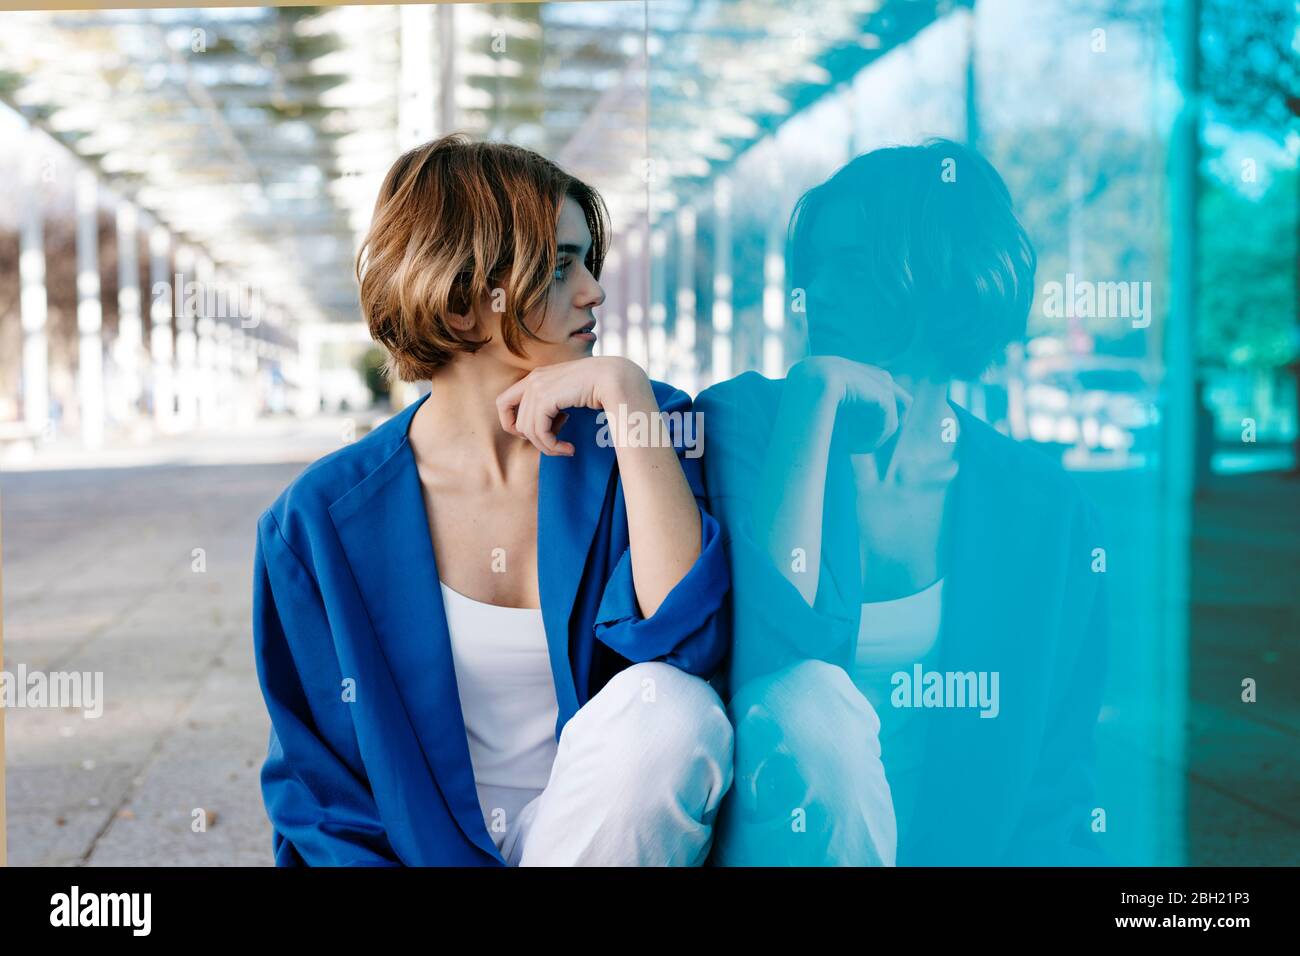 Young woman with urban look sitting on the floor and leaning on colorful glass wall with her reflection Stock Photo